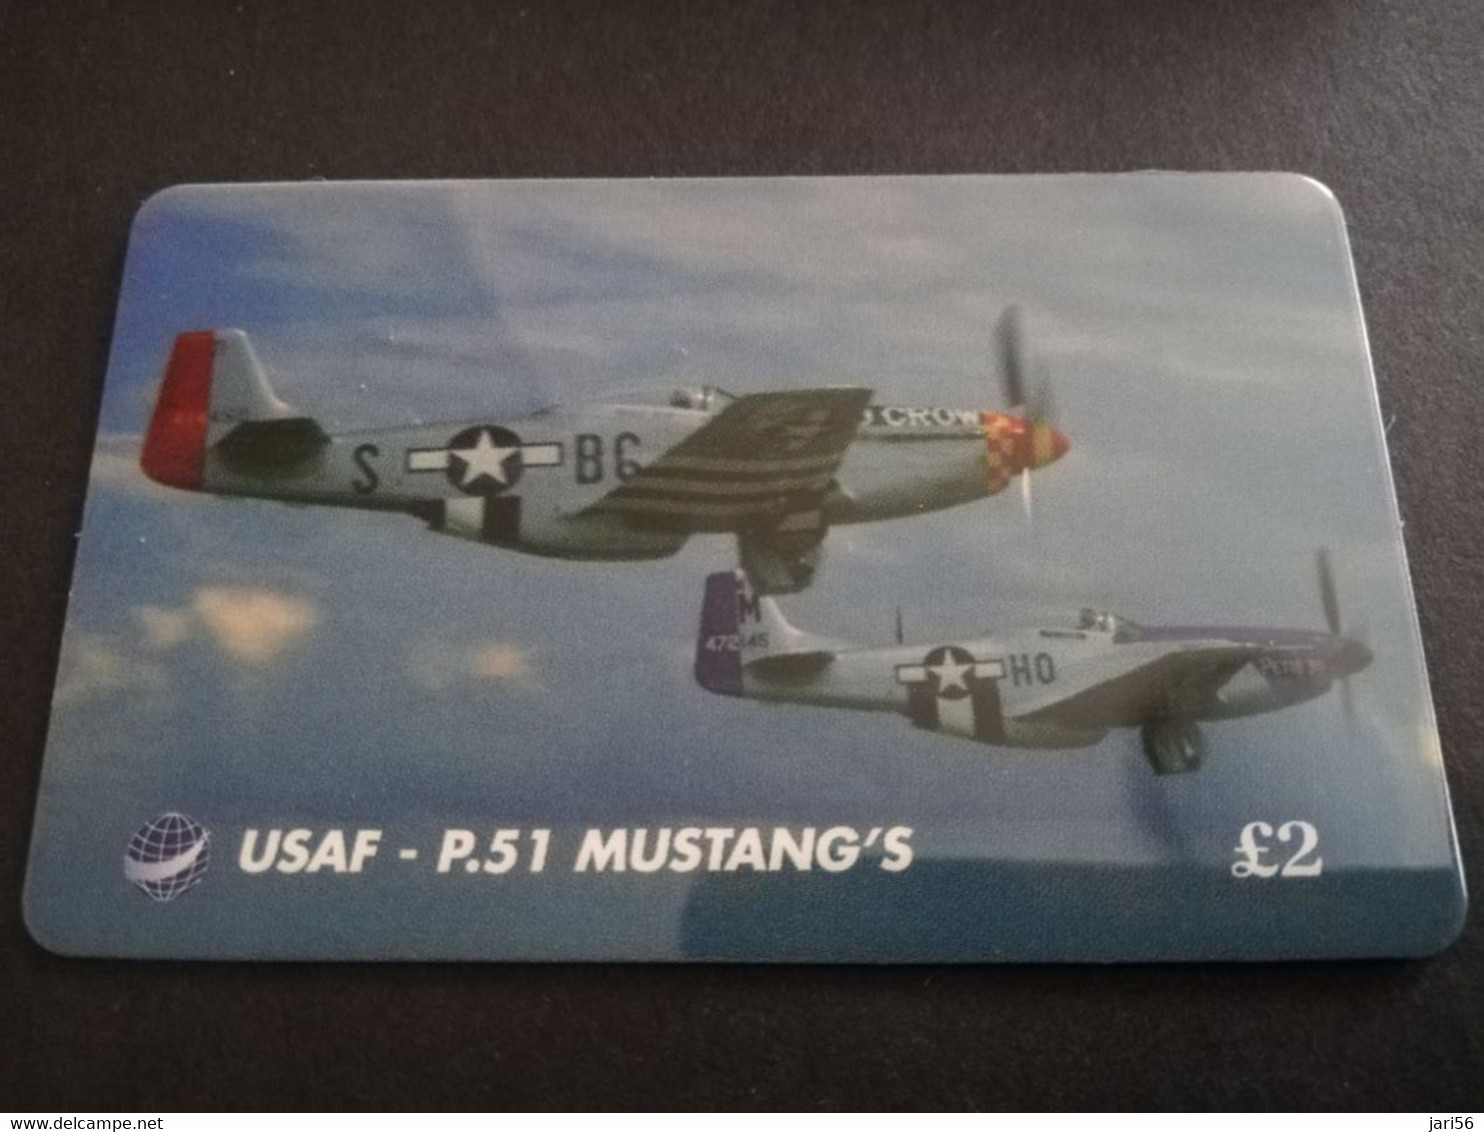 GREAT BRITAIN   2 POUND  AIR PLANES    USAF-P.51 MUSTANG'S   PREPAID CARD      **5447** - [10] Collections